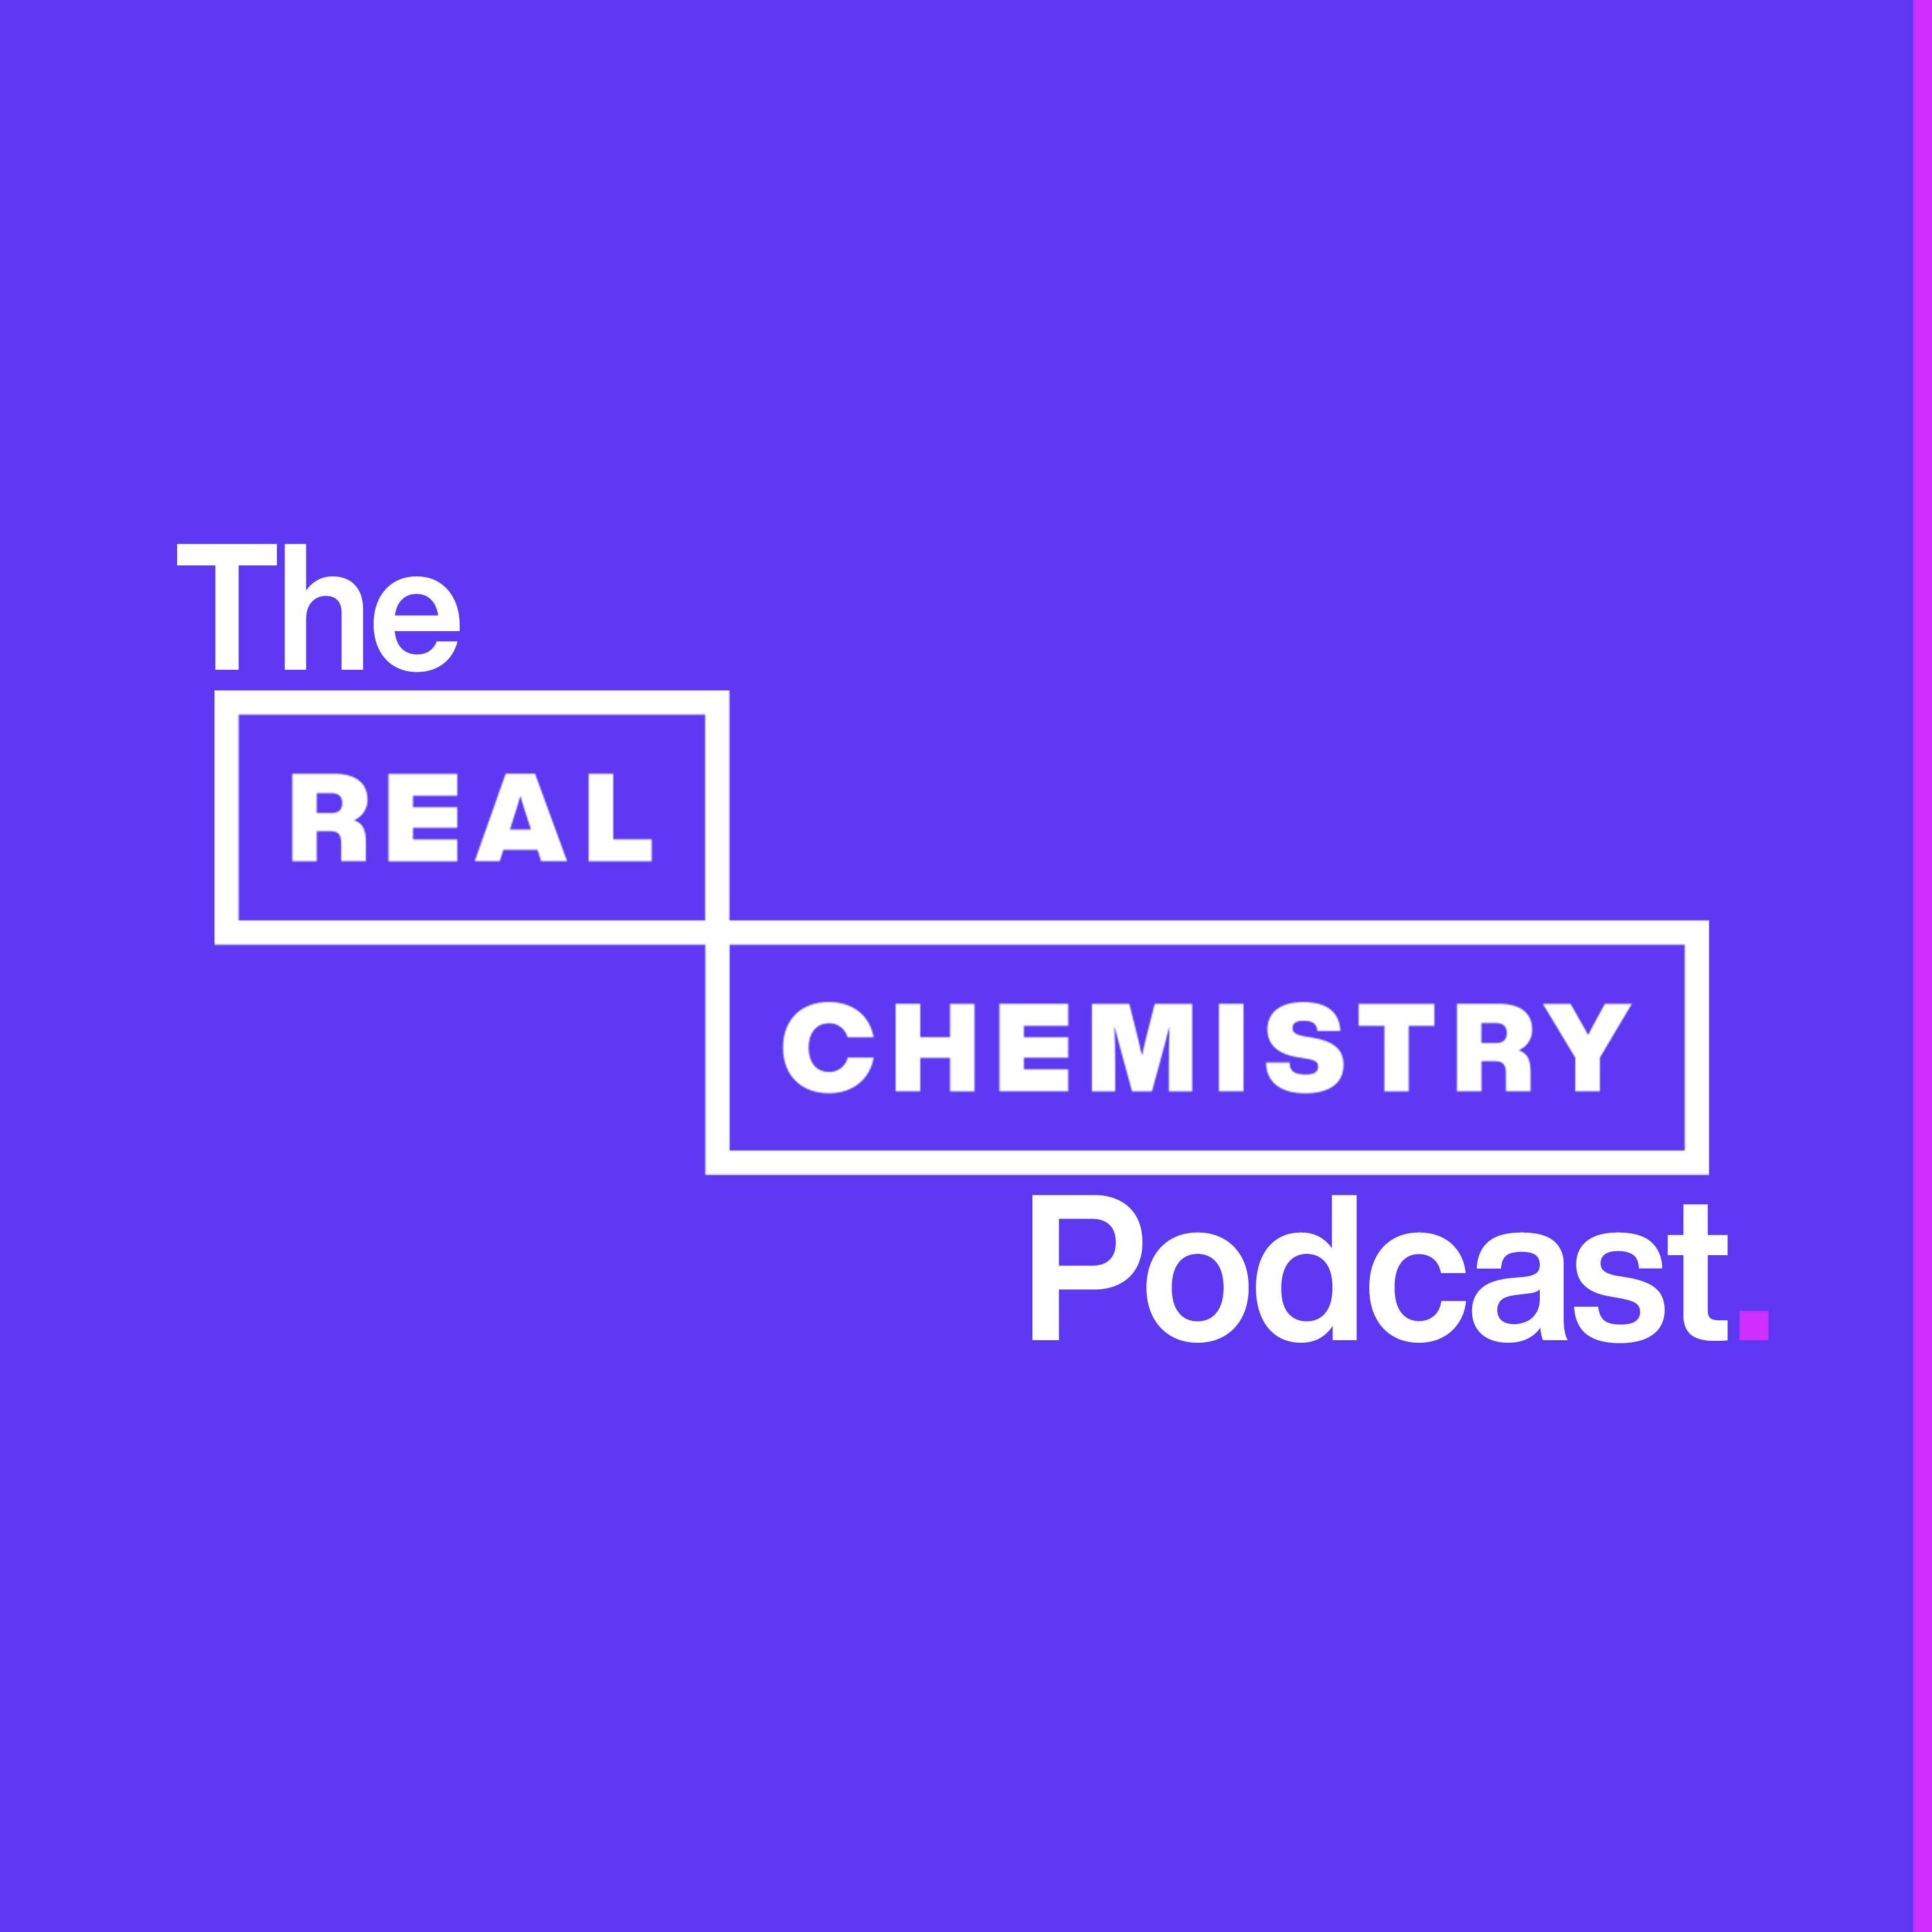 Using Effective Communication to Build Strong Bridges: Sally Susman, Pfizer & Jim Weiss, Real Chemistry